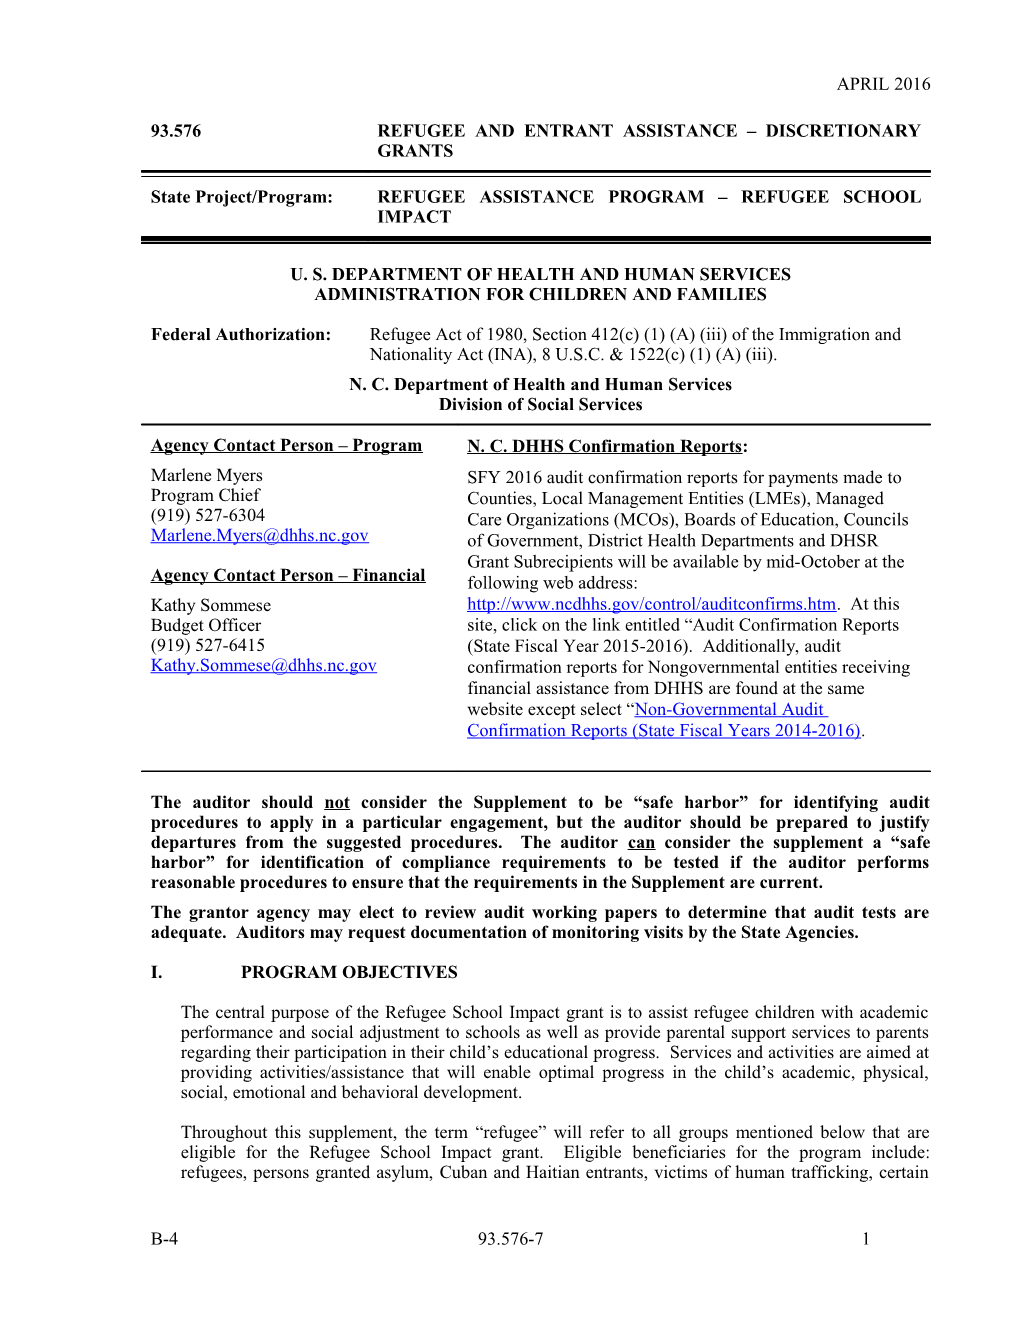 Template for Federal Program Compliance Supplements 2002